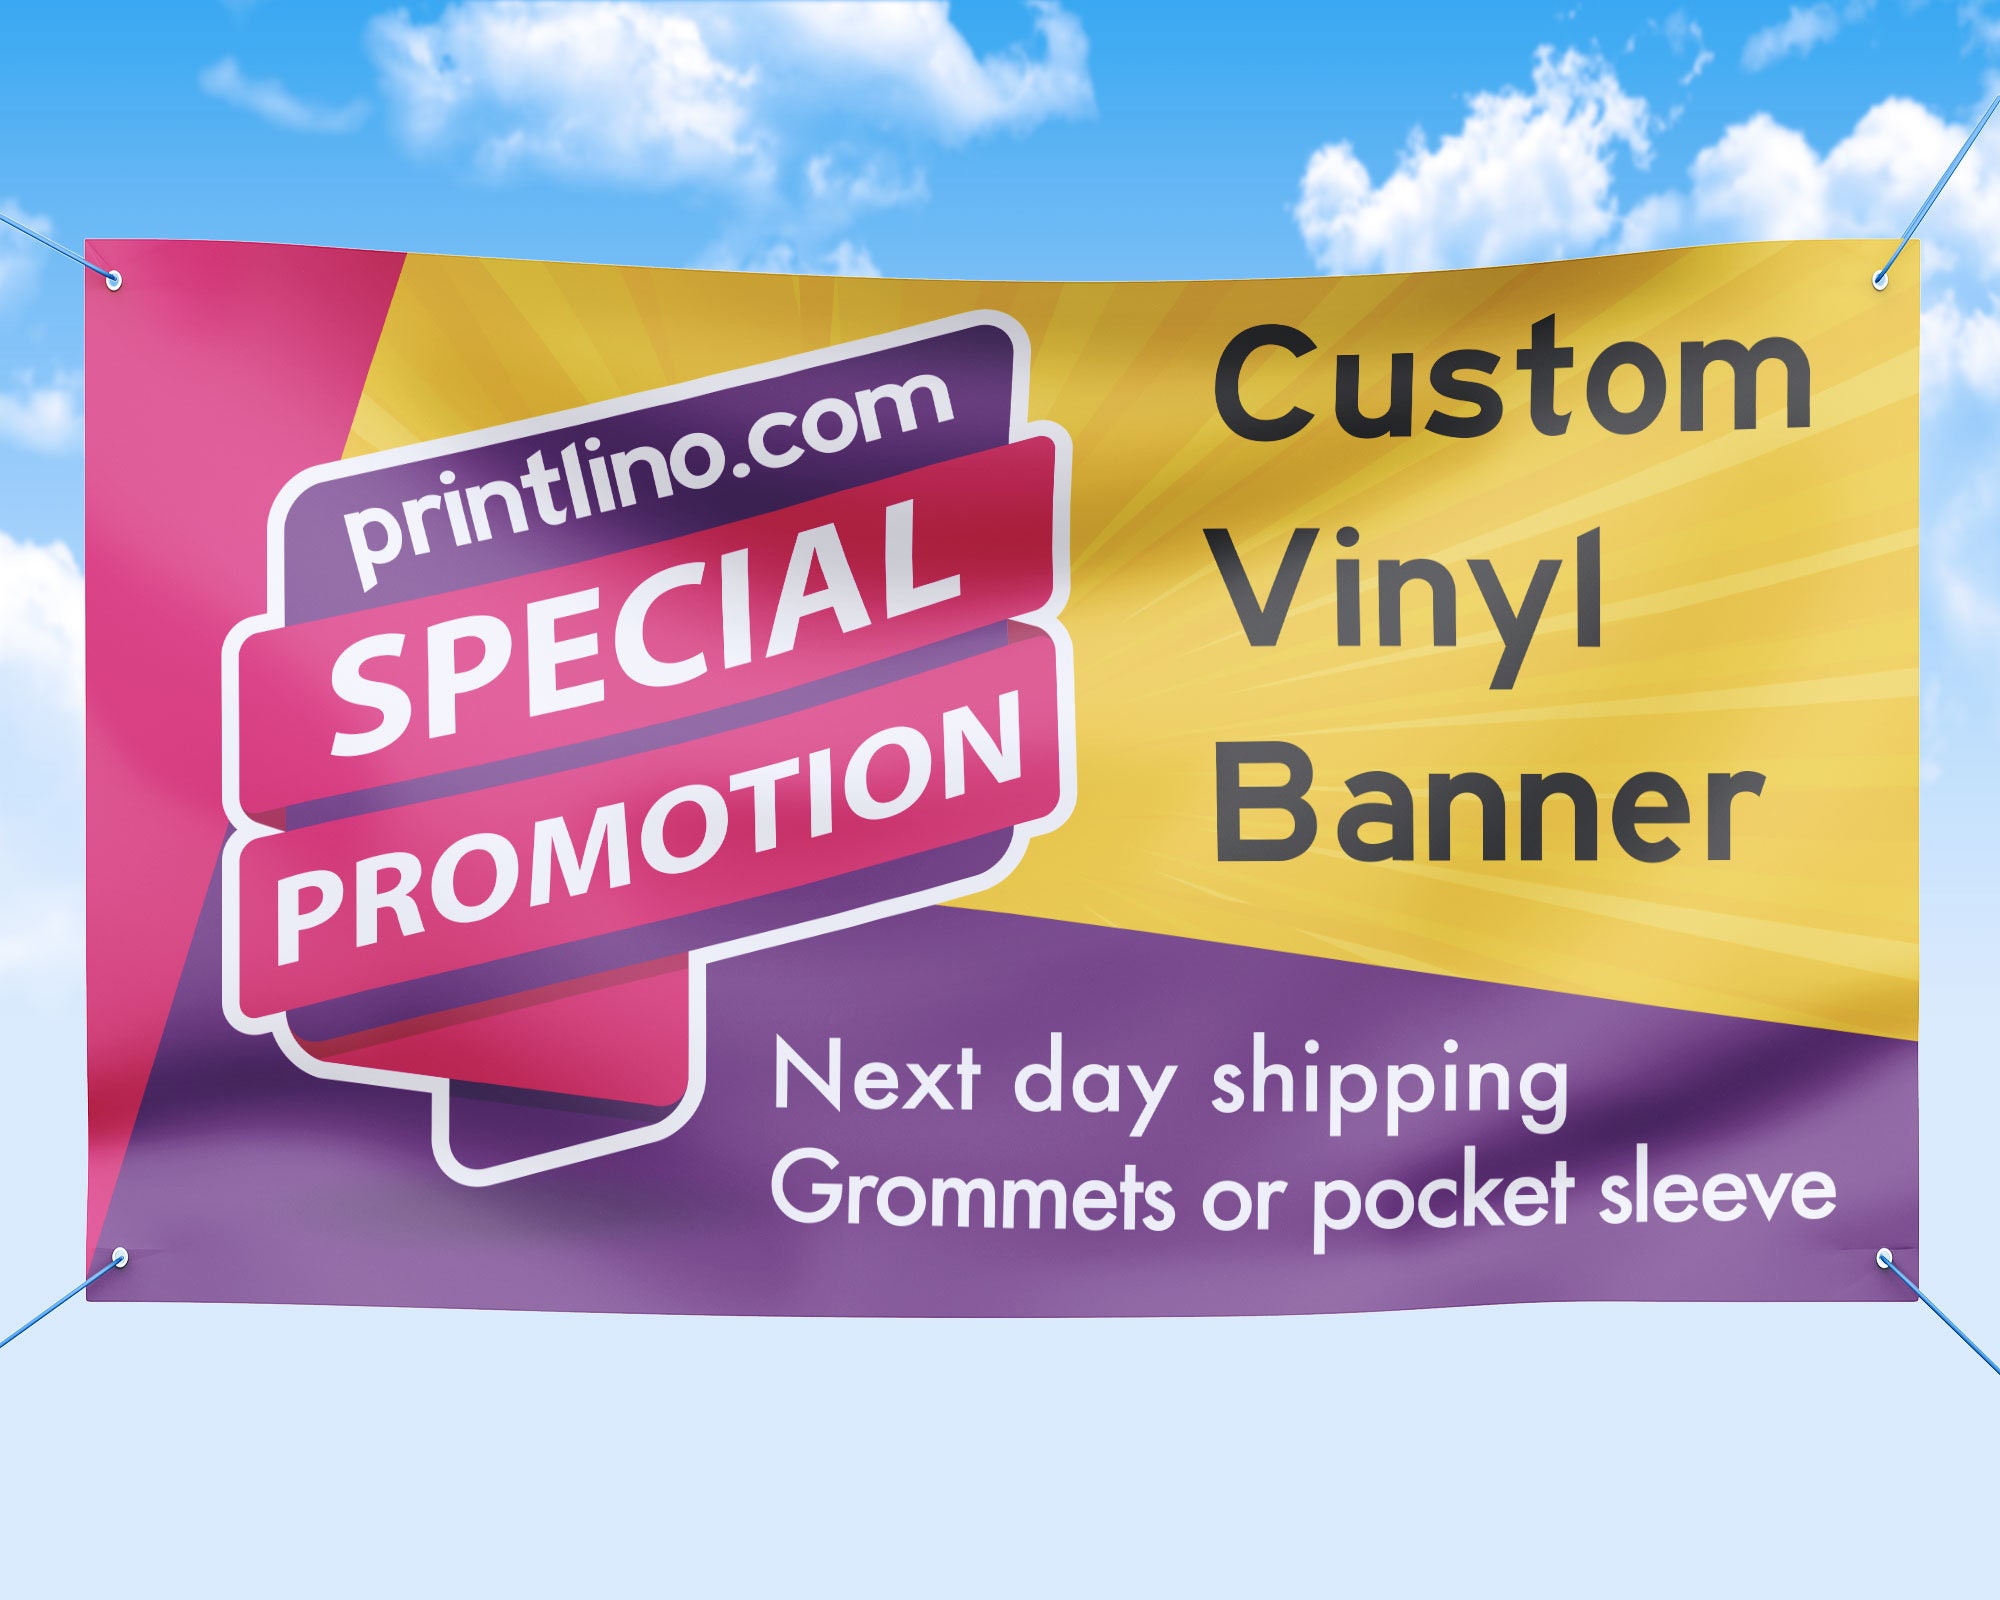 BLACK FRIDAY SALE BANNER SIGN OUTDOOR POSTER waterproof PVC with Eyelets 005 